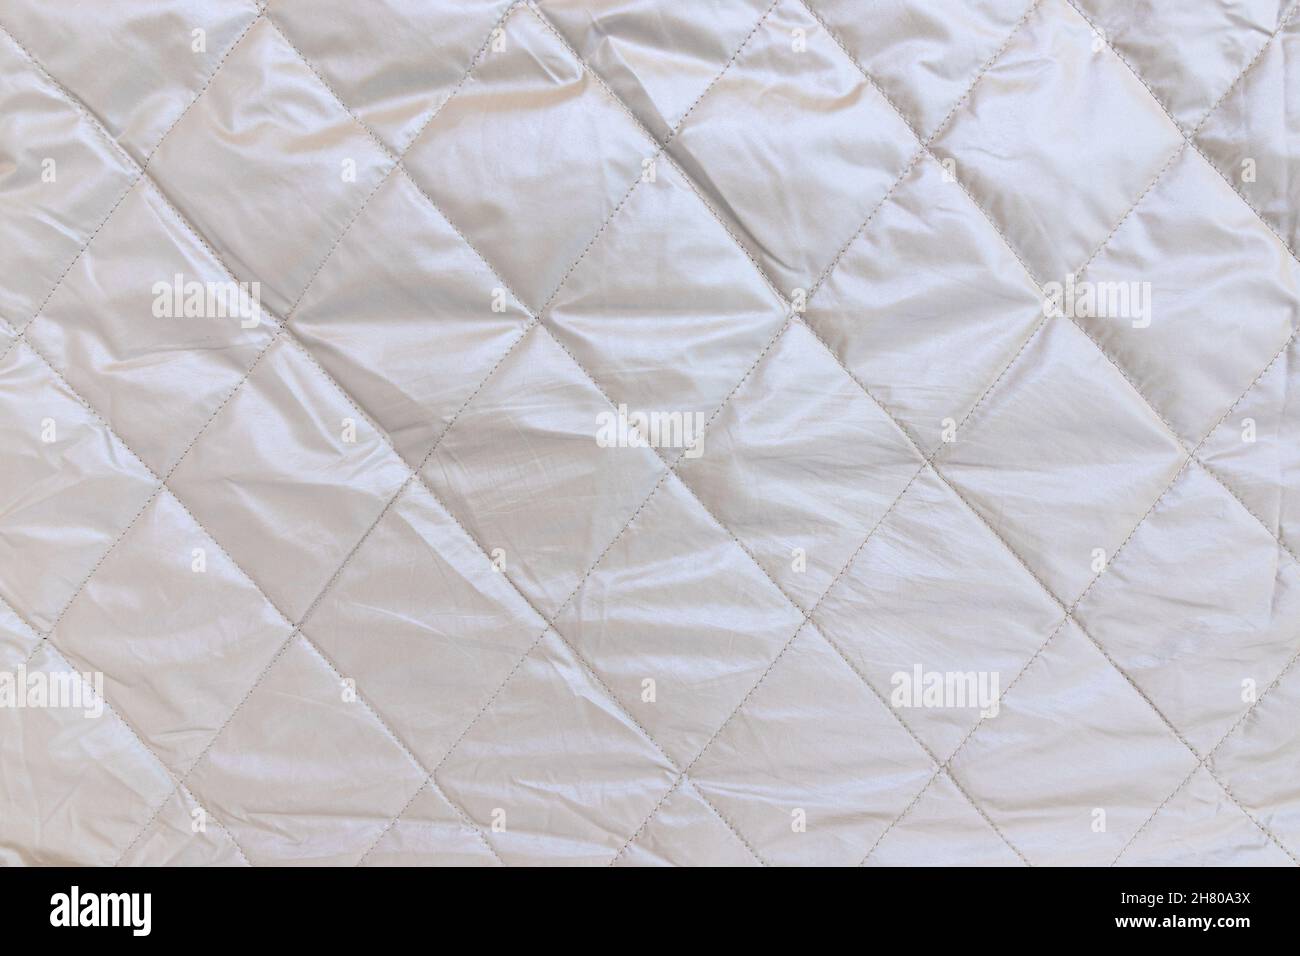 21,733 Black Quilted Fabric Images, Stock Photos, 3D objects